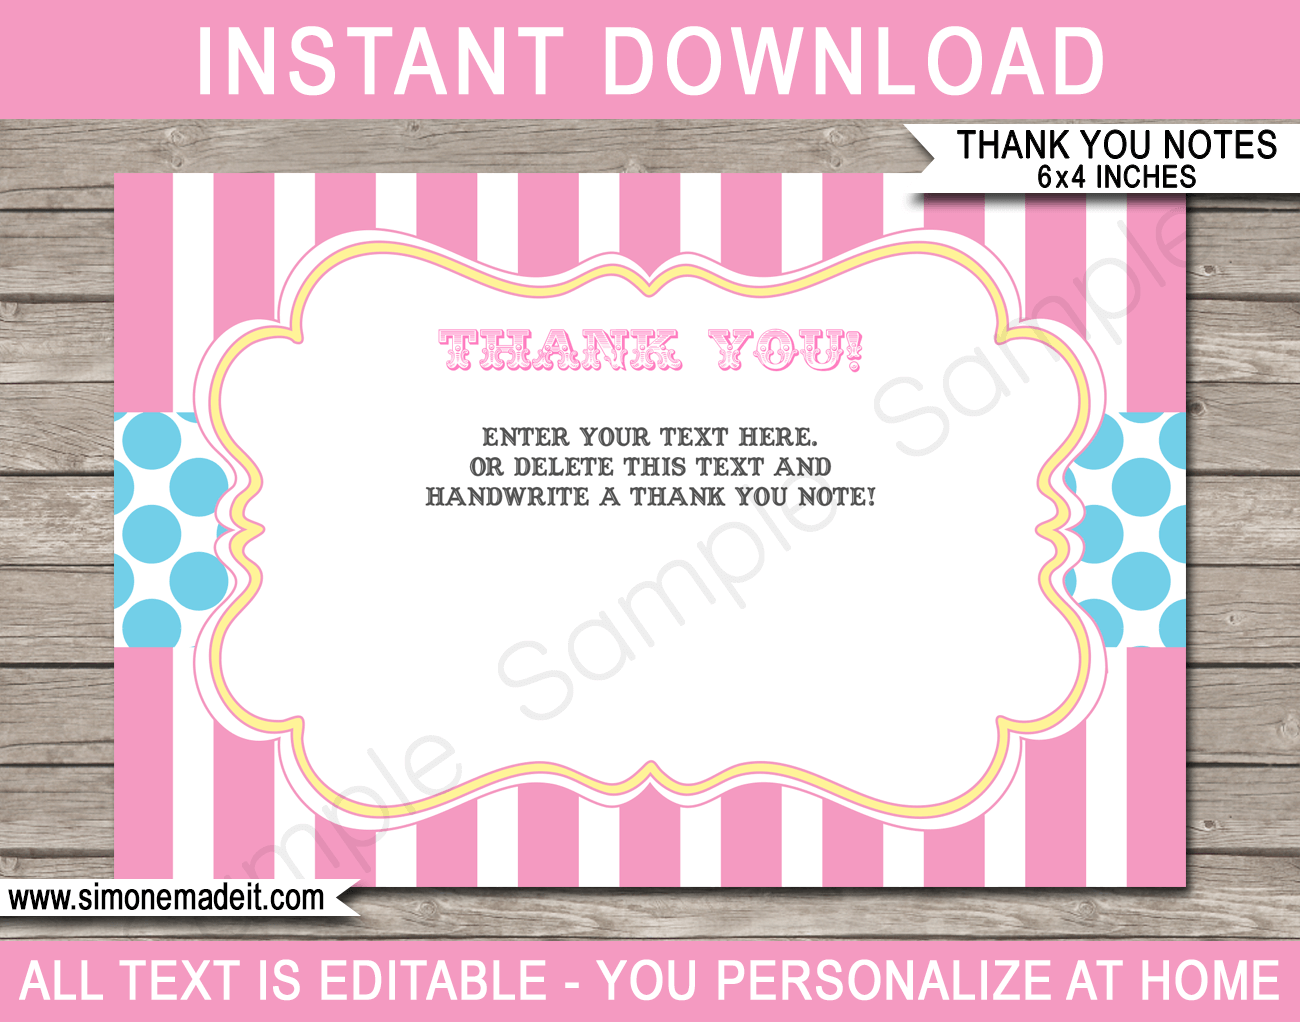 Printable Carnival Birthday Party Thank You Cards - Favor Tags - Circus or Carnival Birthday Party theme - Editable Template - Instant Download via simonemadeit.com